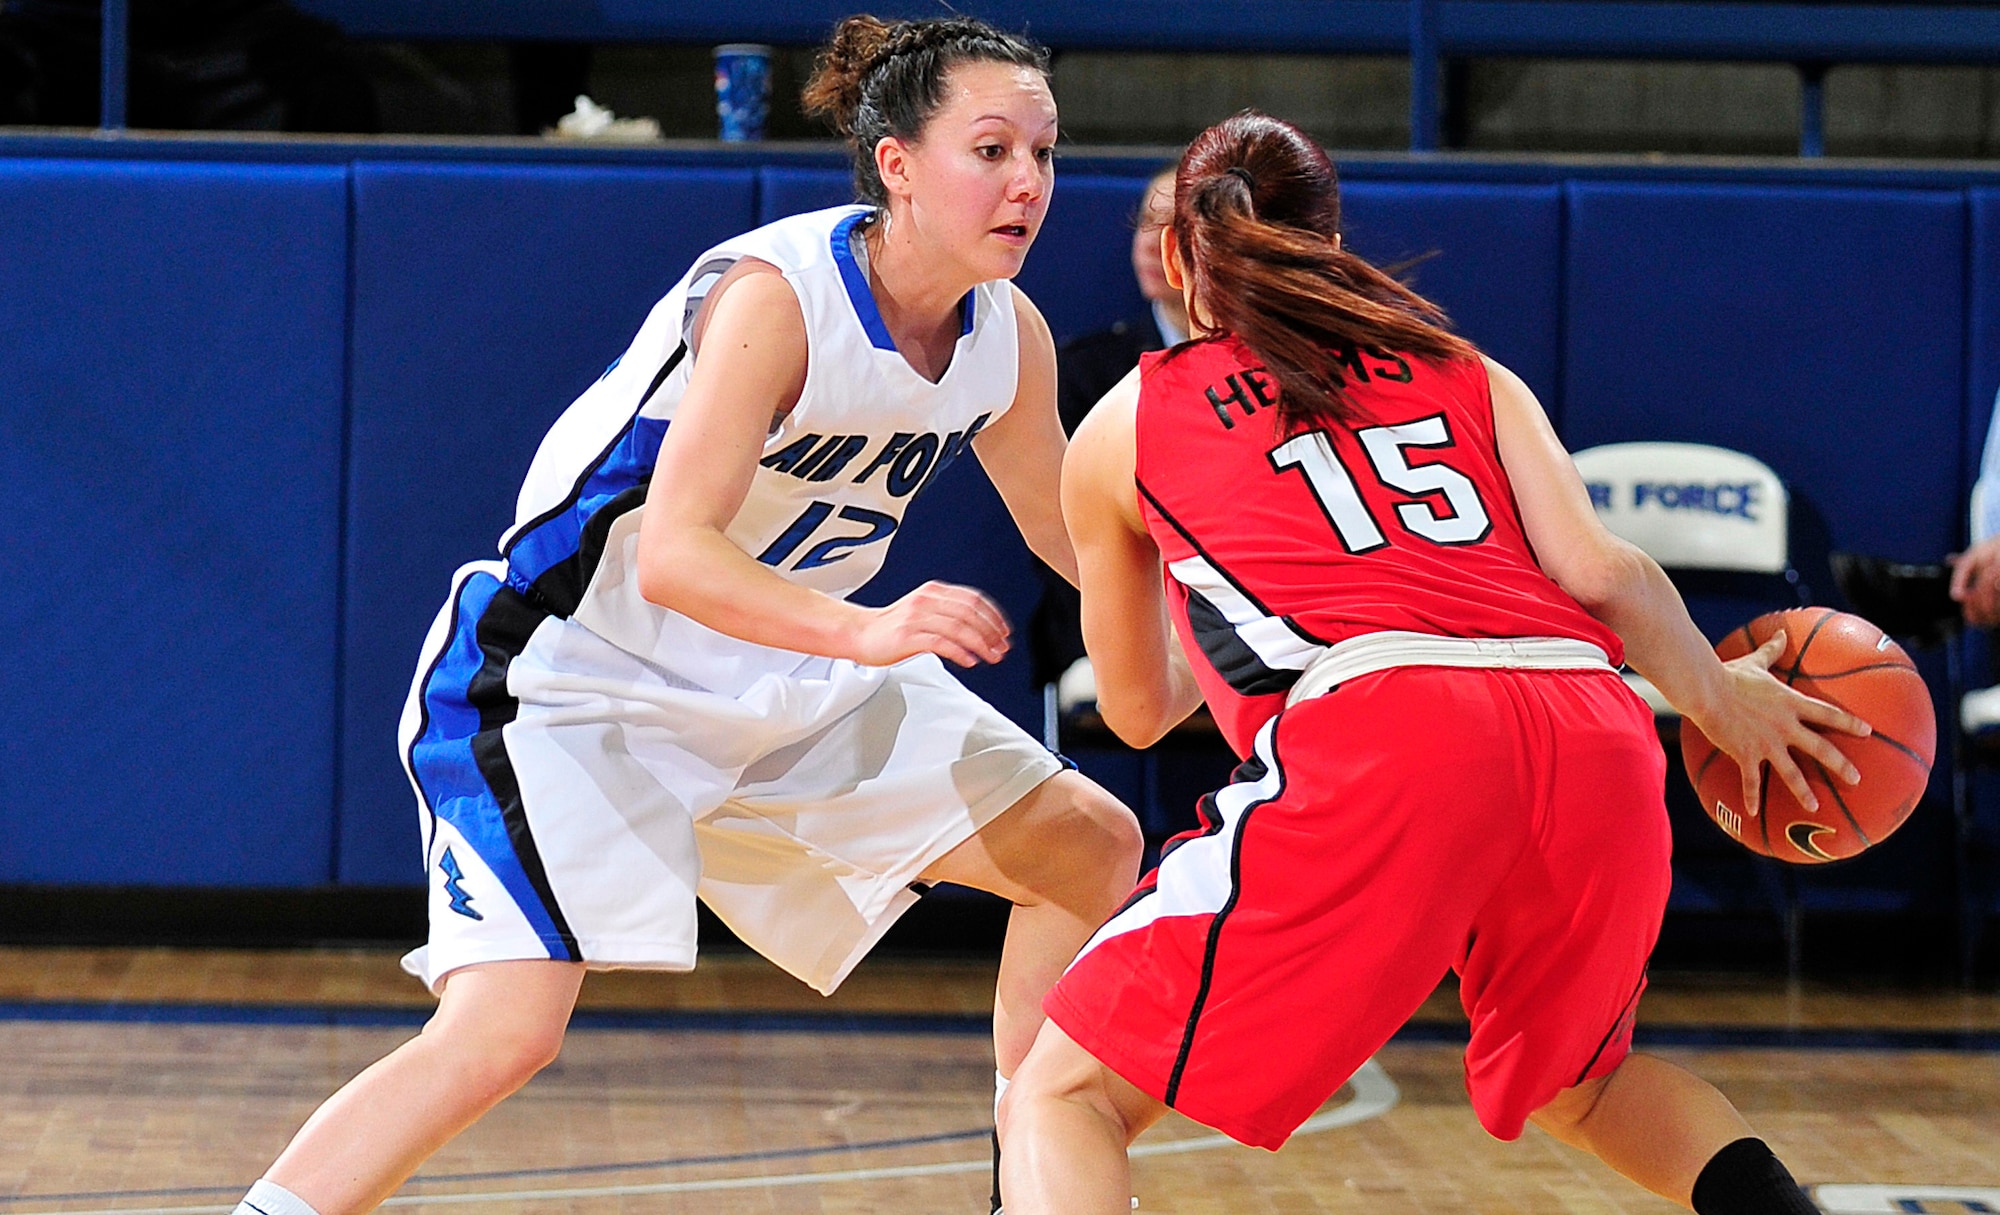 Air Force's Megan Muniz defends against UNLV's Erica Helms during the Falcons' game against the Rebels at the Air Force Academy's Clune Arena Feb. 16, 2011. Muniz, a sophomore and native of Rio Rancho, N.M., had nine points and two rebounds in the Falcons' 91-87 victory. (U.S. Air Force photo/Bill Evans)